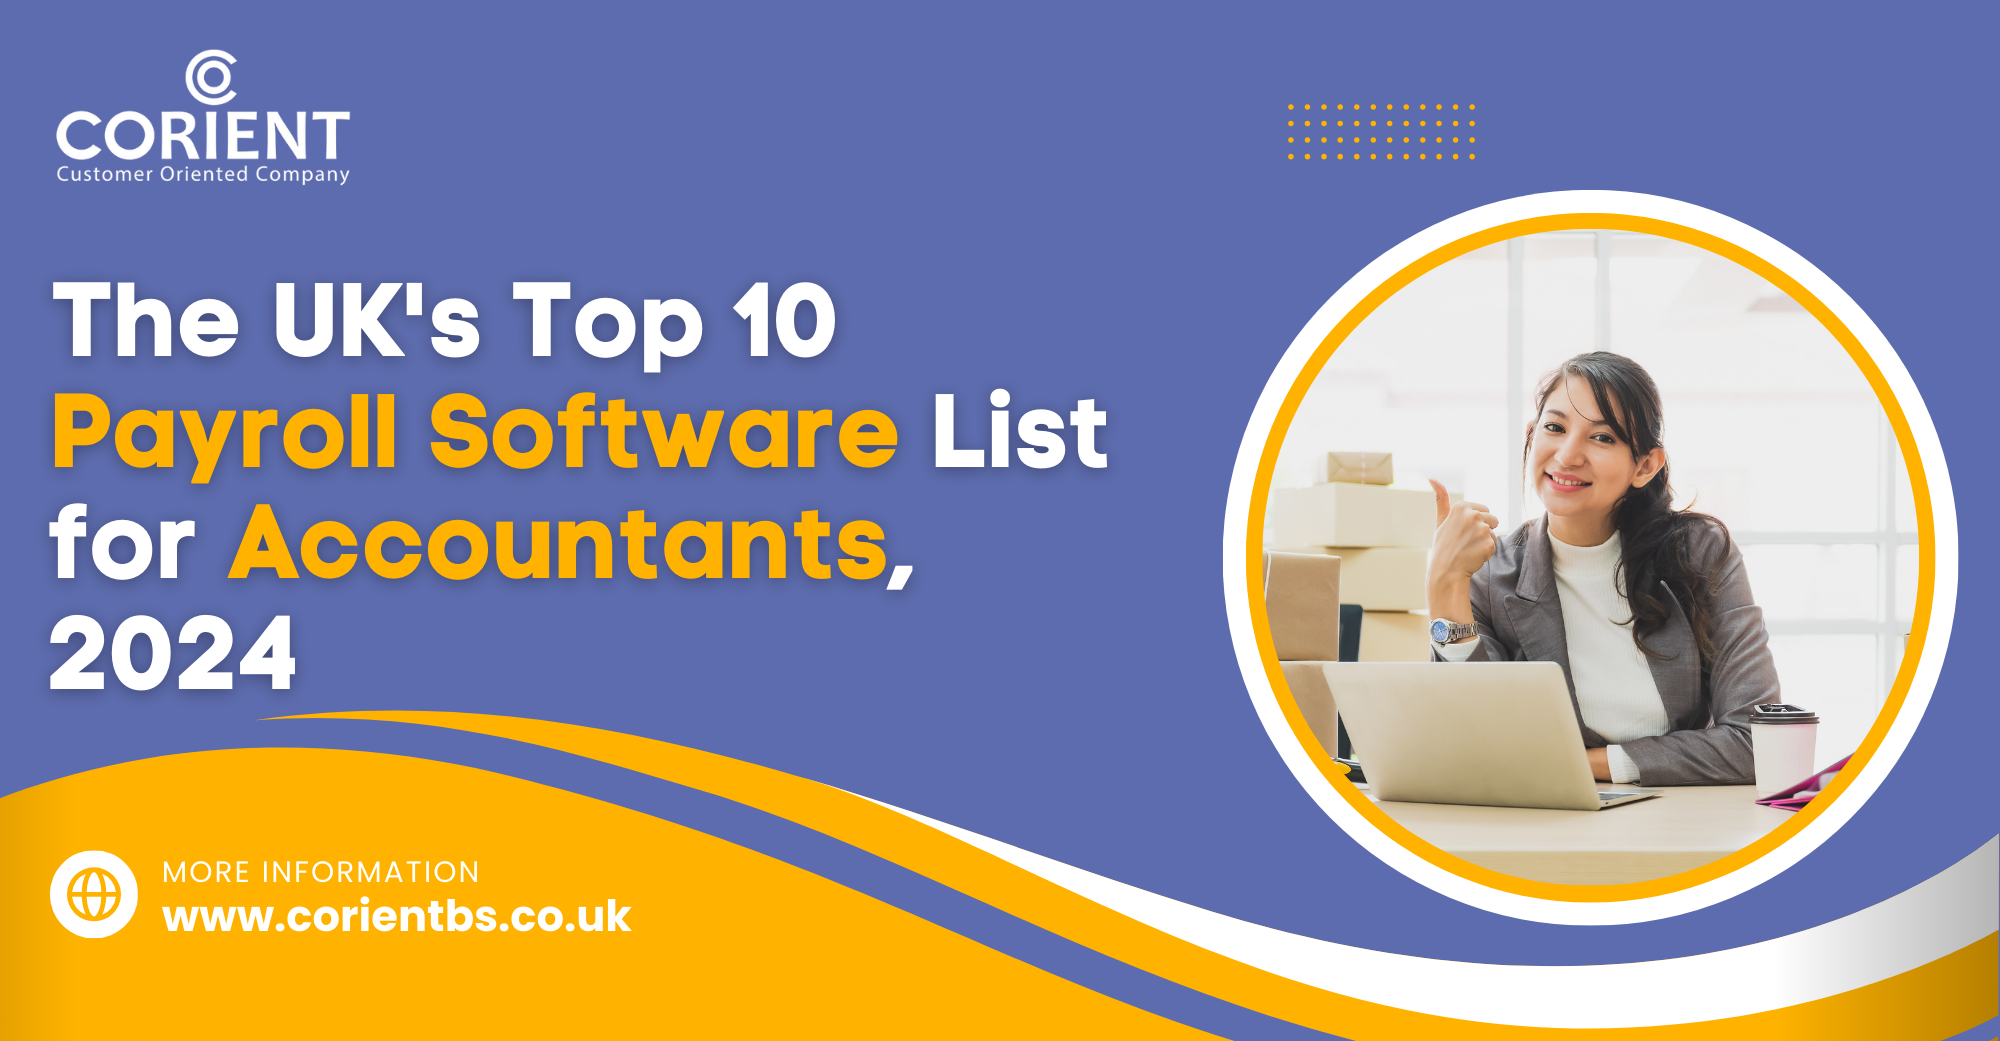 The UK’s Top 10 Payroll Software List for Accountants, 2024